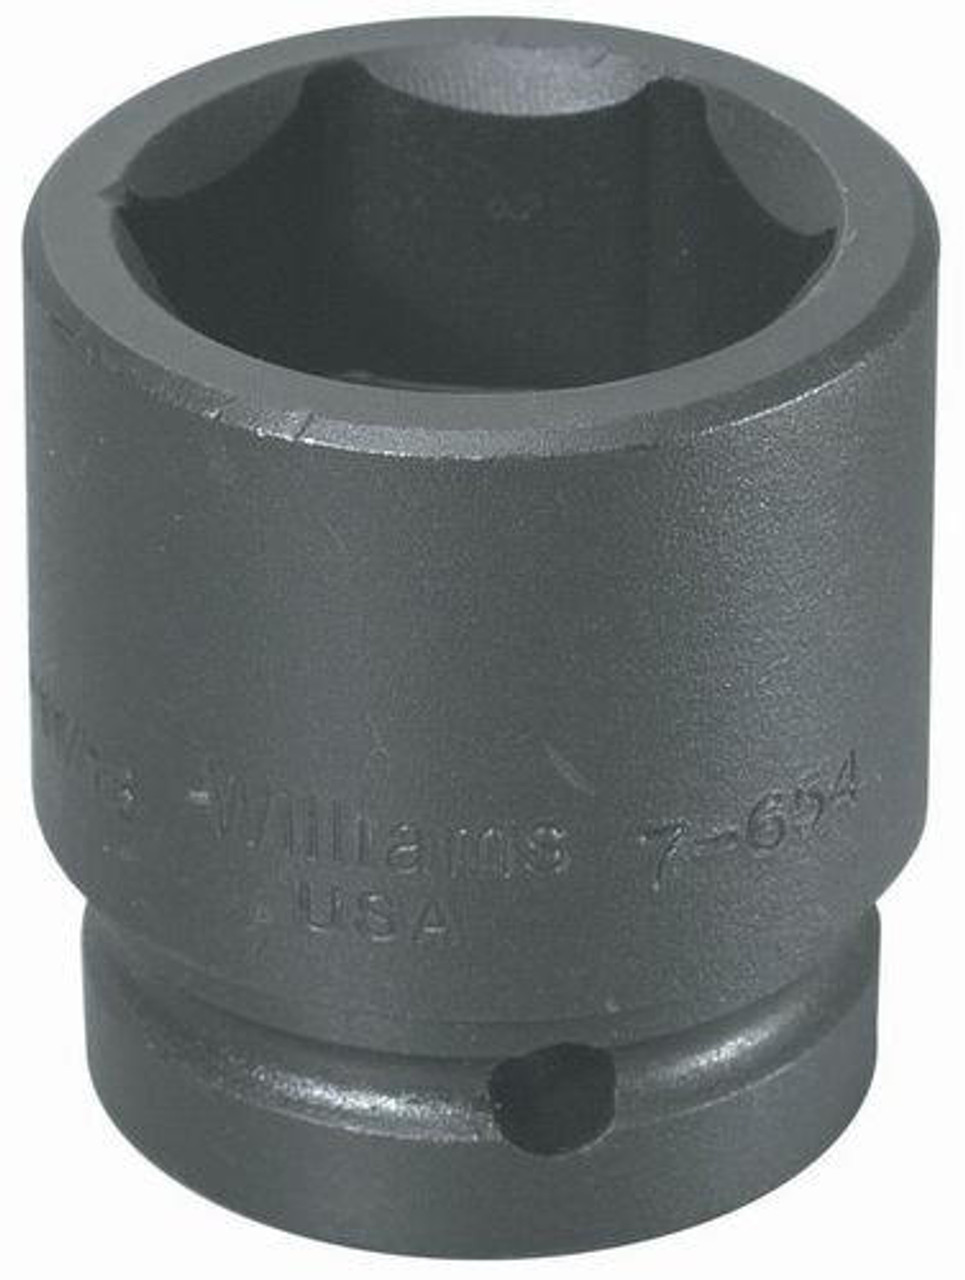 Williams Made In USA 4 1/8" Williams 1" Dr Shallow Impact Socket 6 Pt - 7-6132 